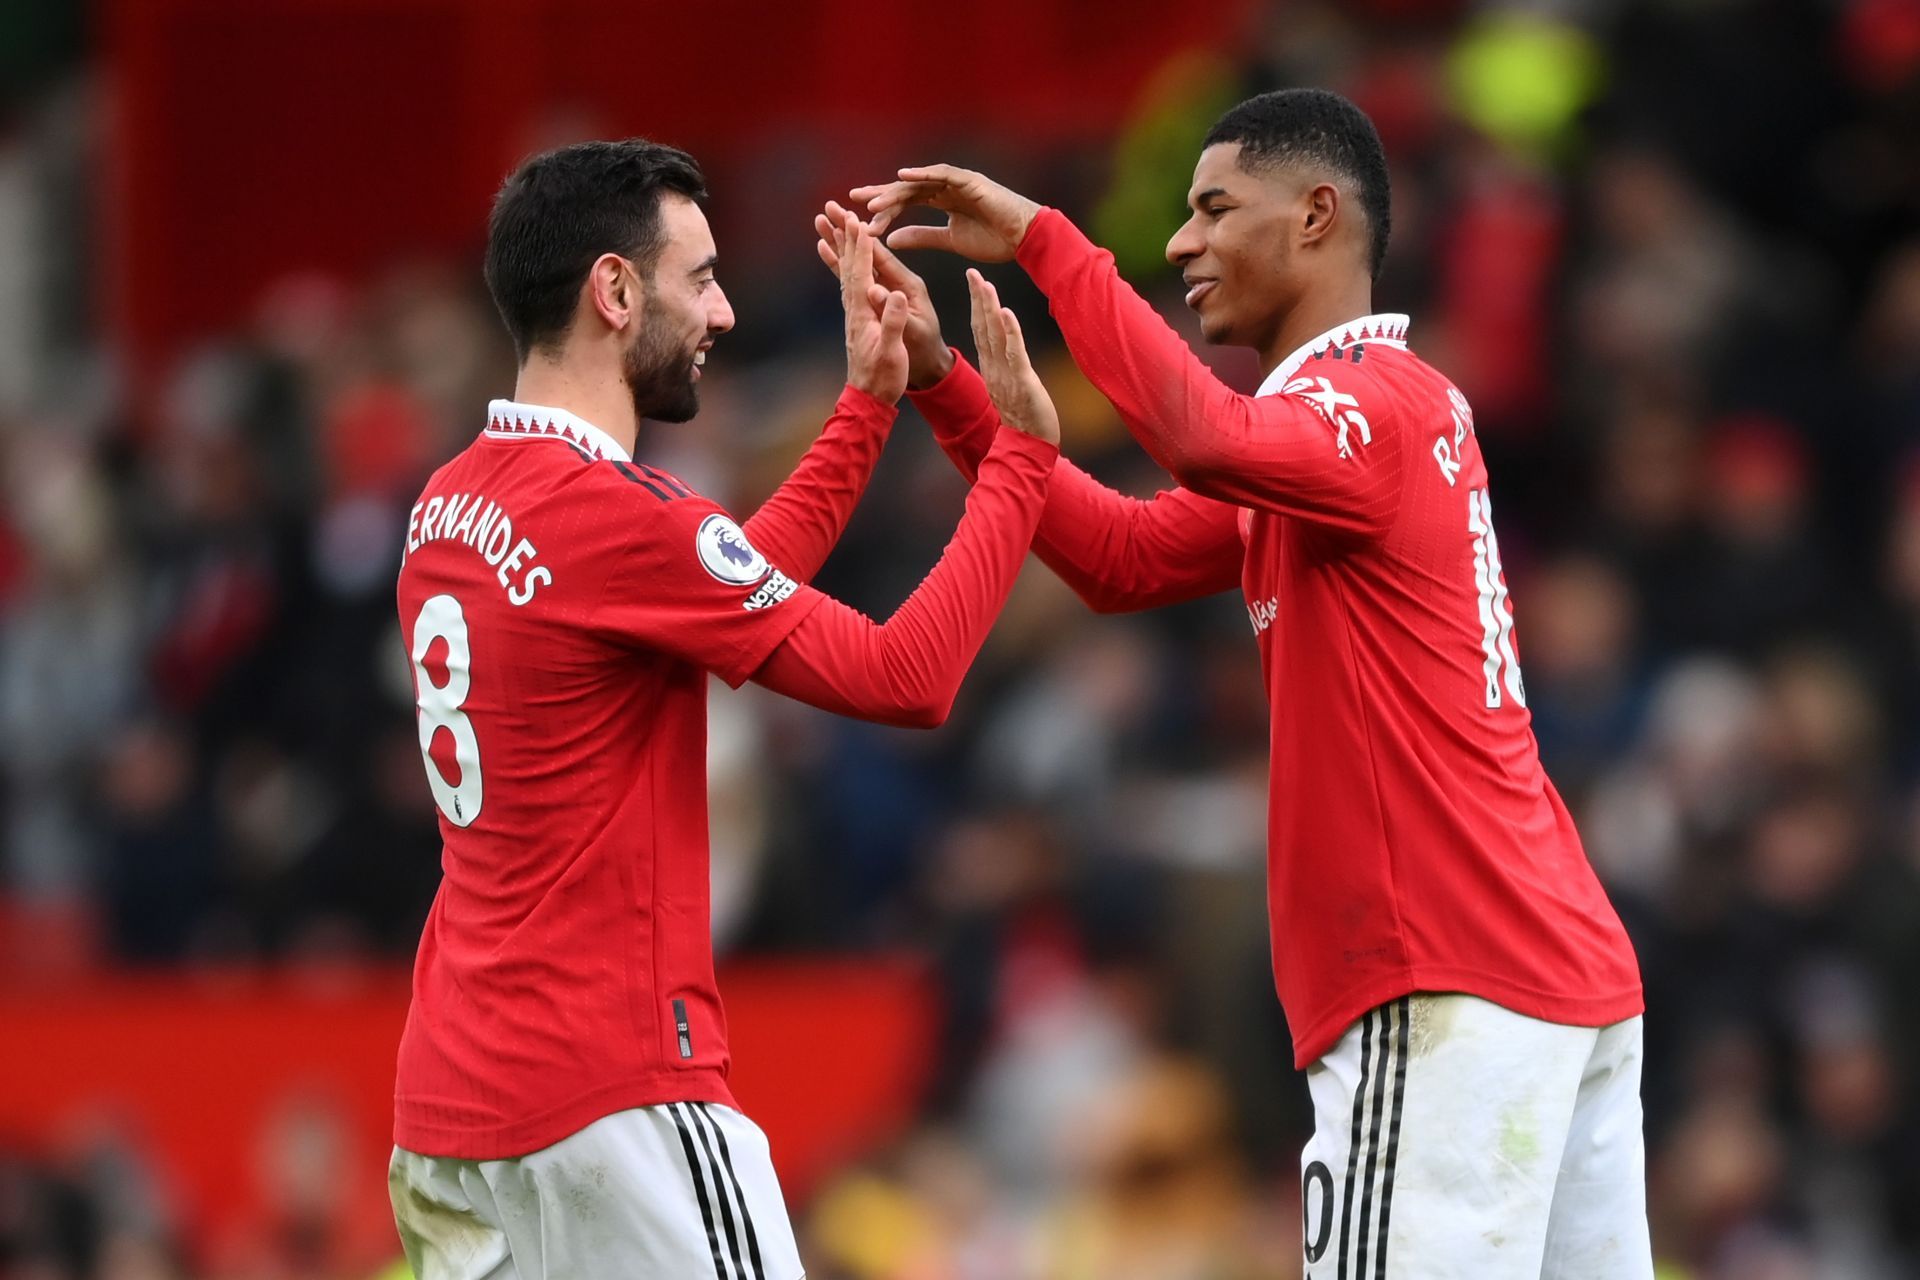 The duo have been in great form for United this season.